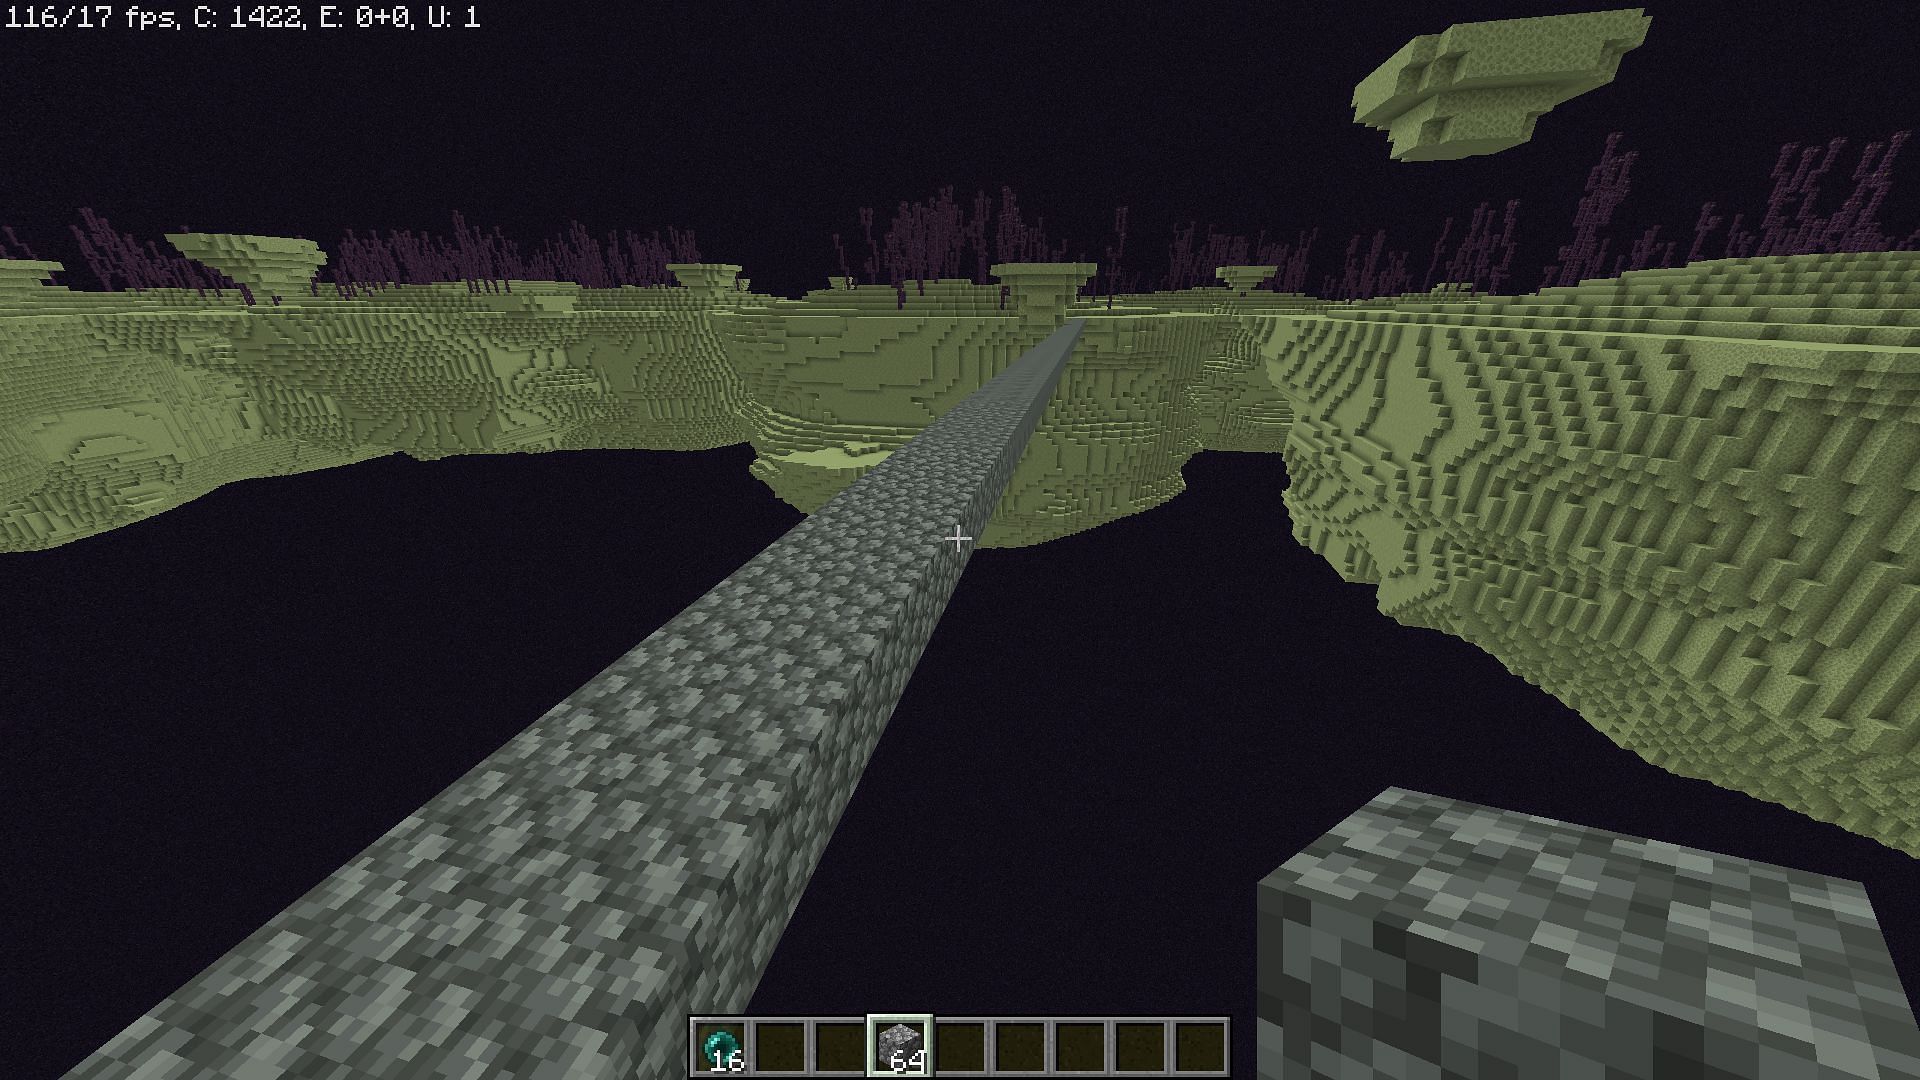 The safest way to travel in the End is by bridging between islands in Minecraft (Image via Mojang)